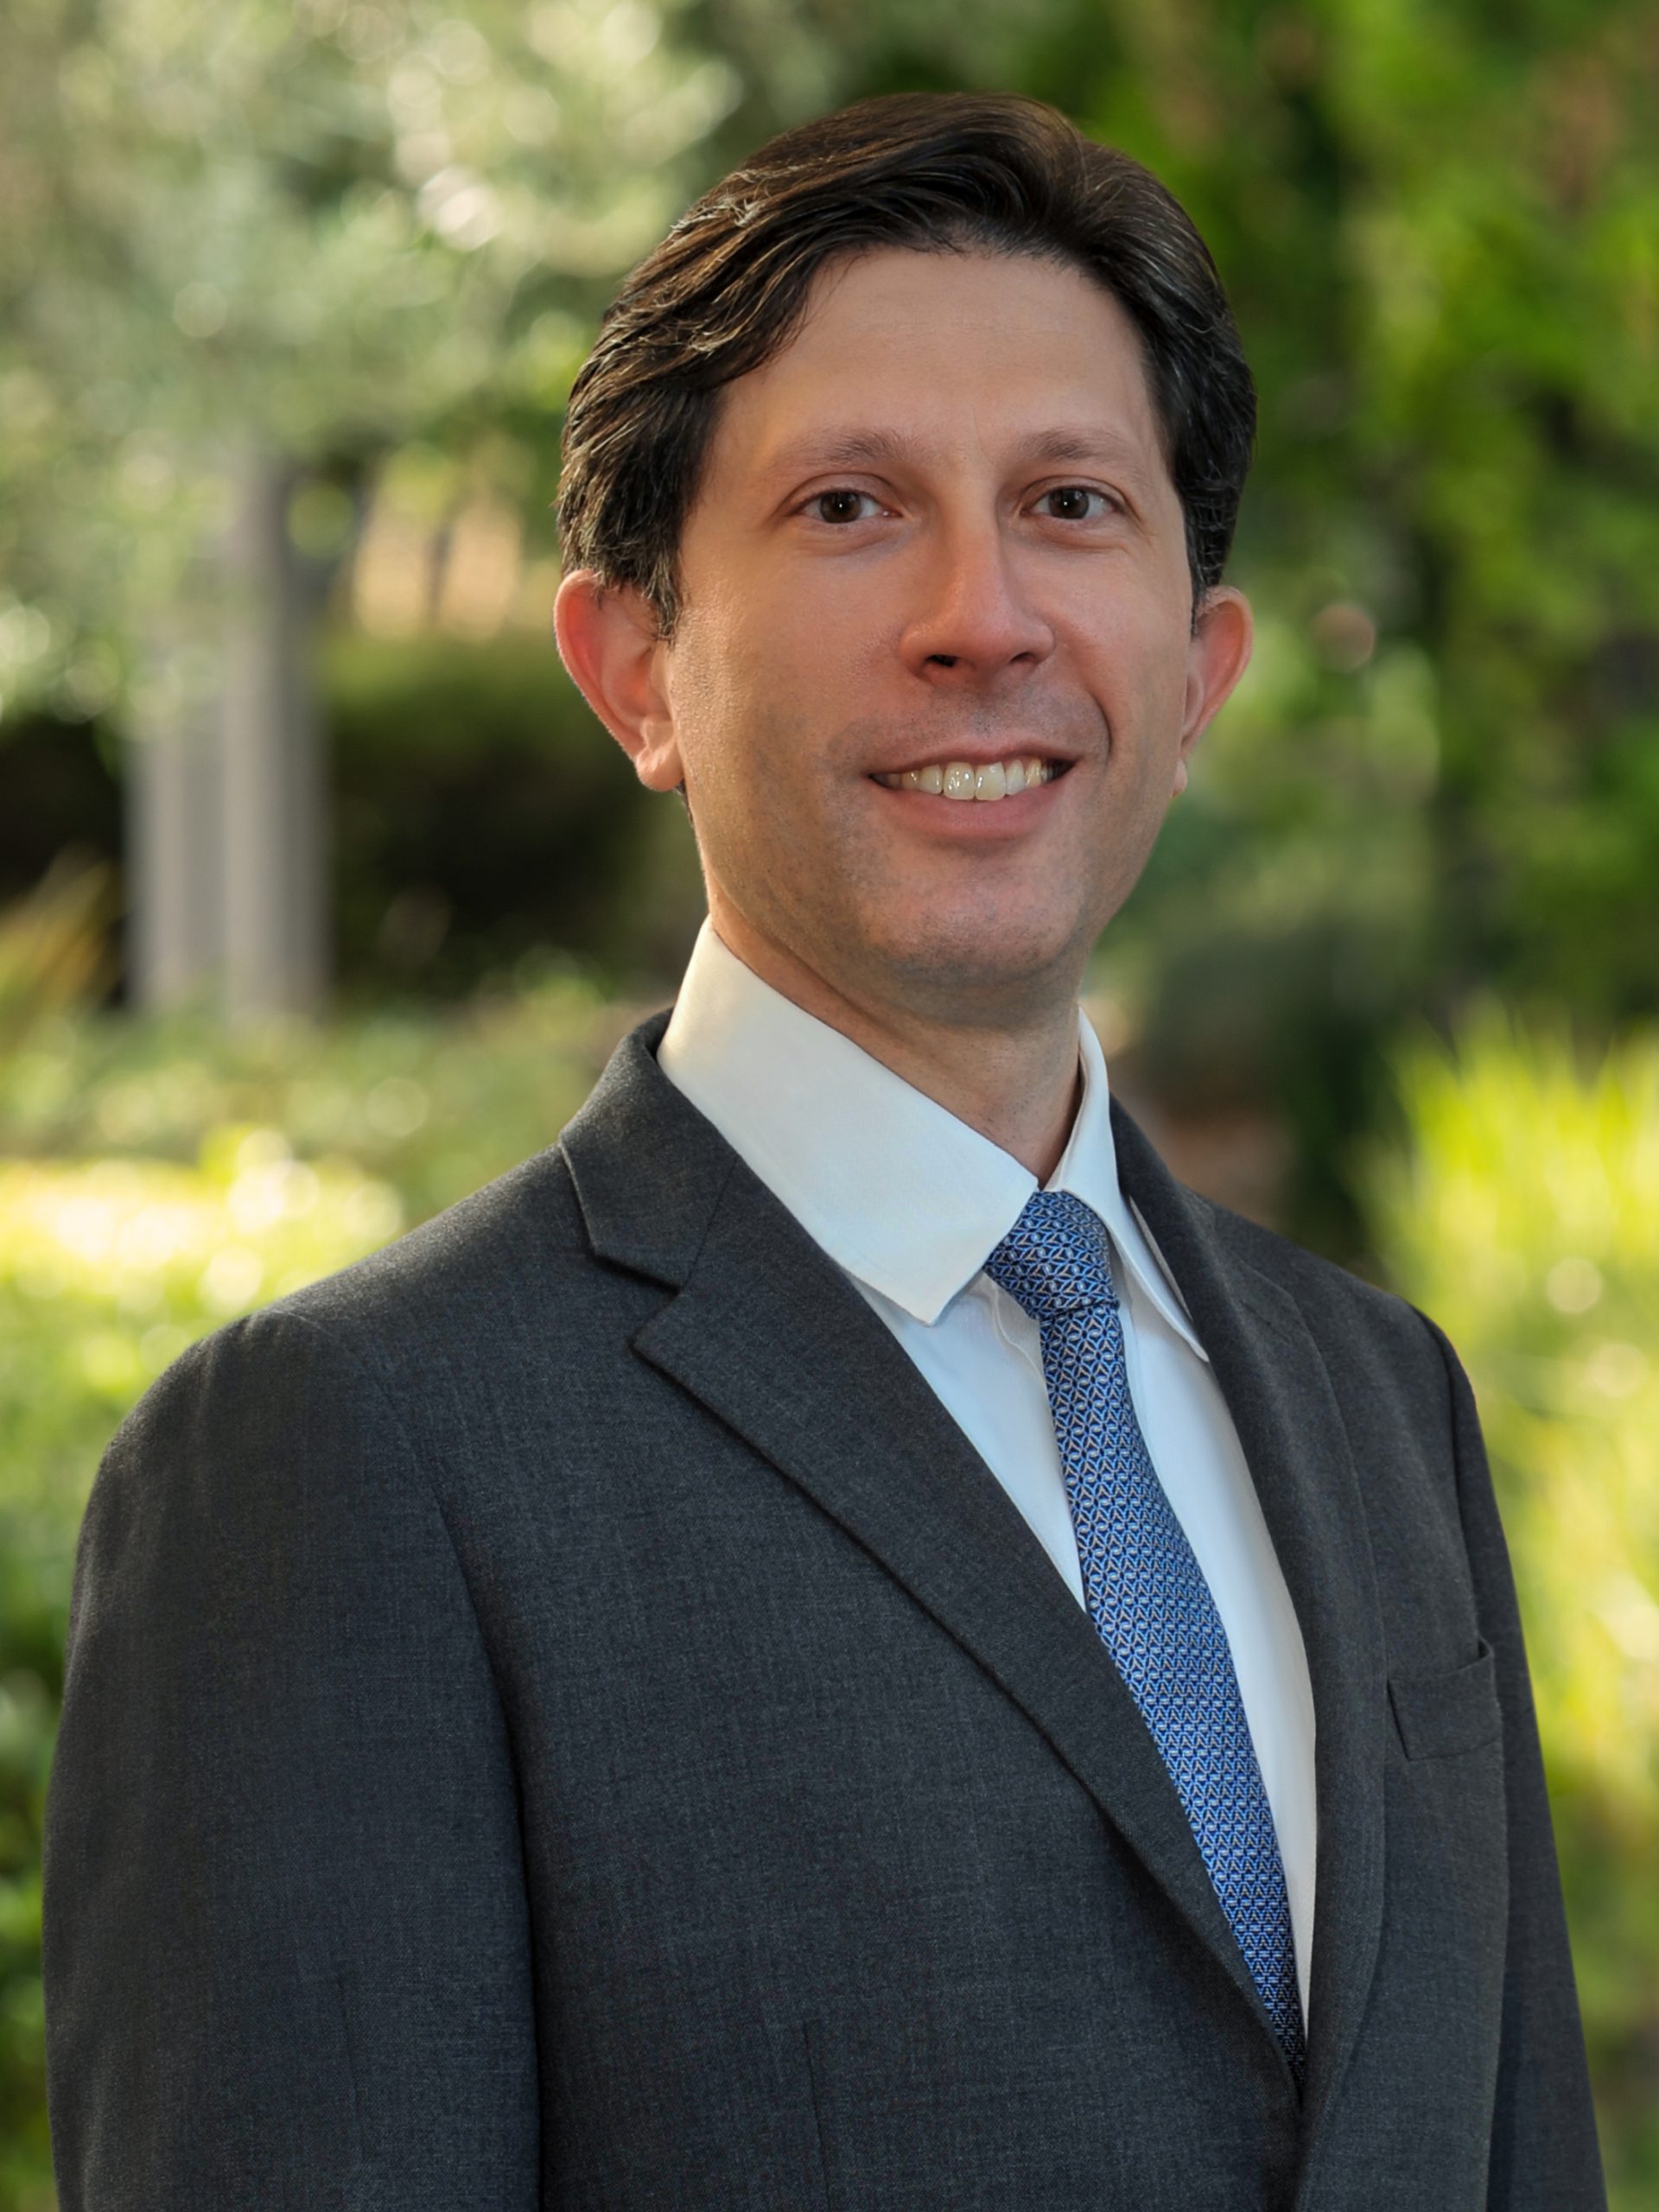 Profile shot of Dr. Fabio Settecase, a Caucasian male wearing a suit and tie outdoors